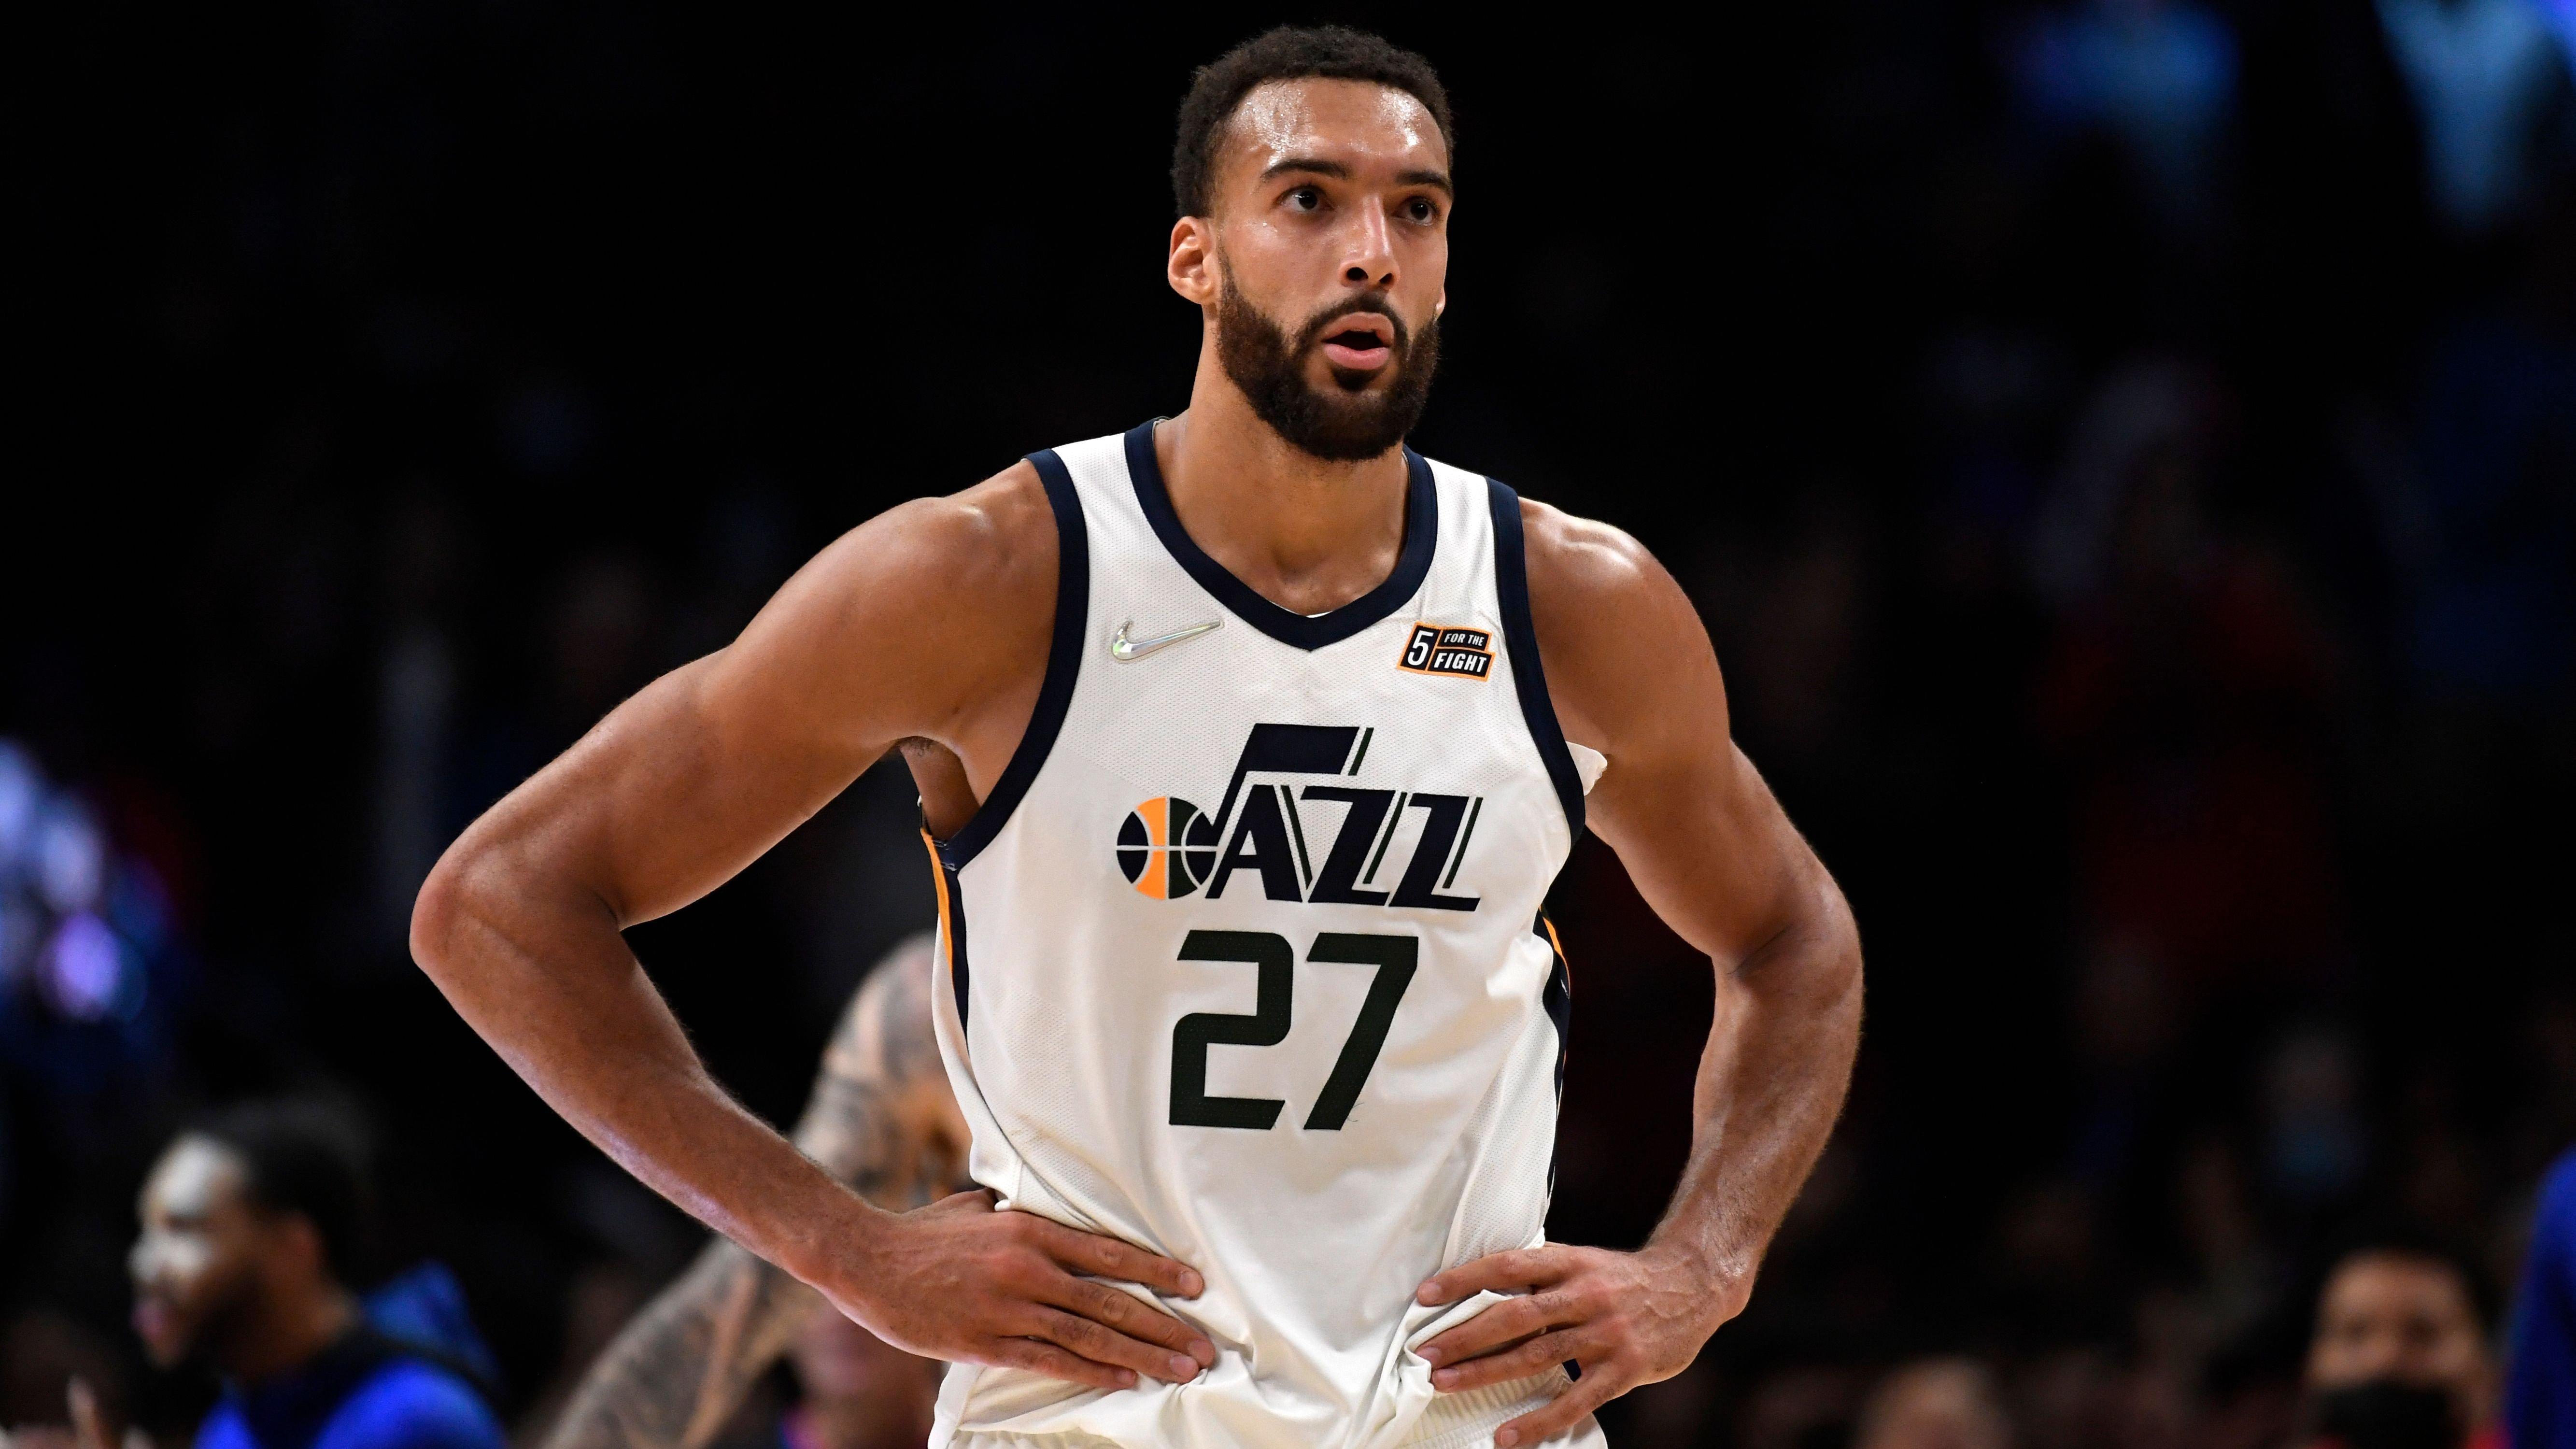 Rudy Gobert waiting for the ref's decision